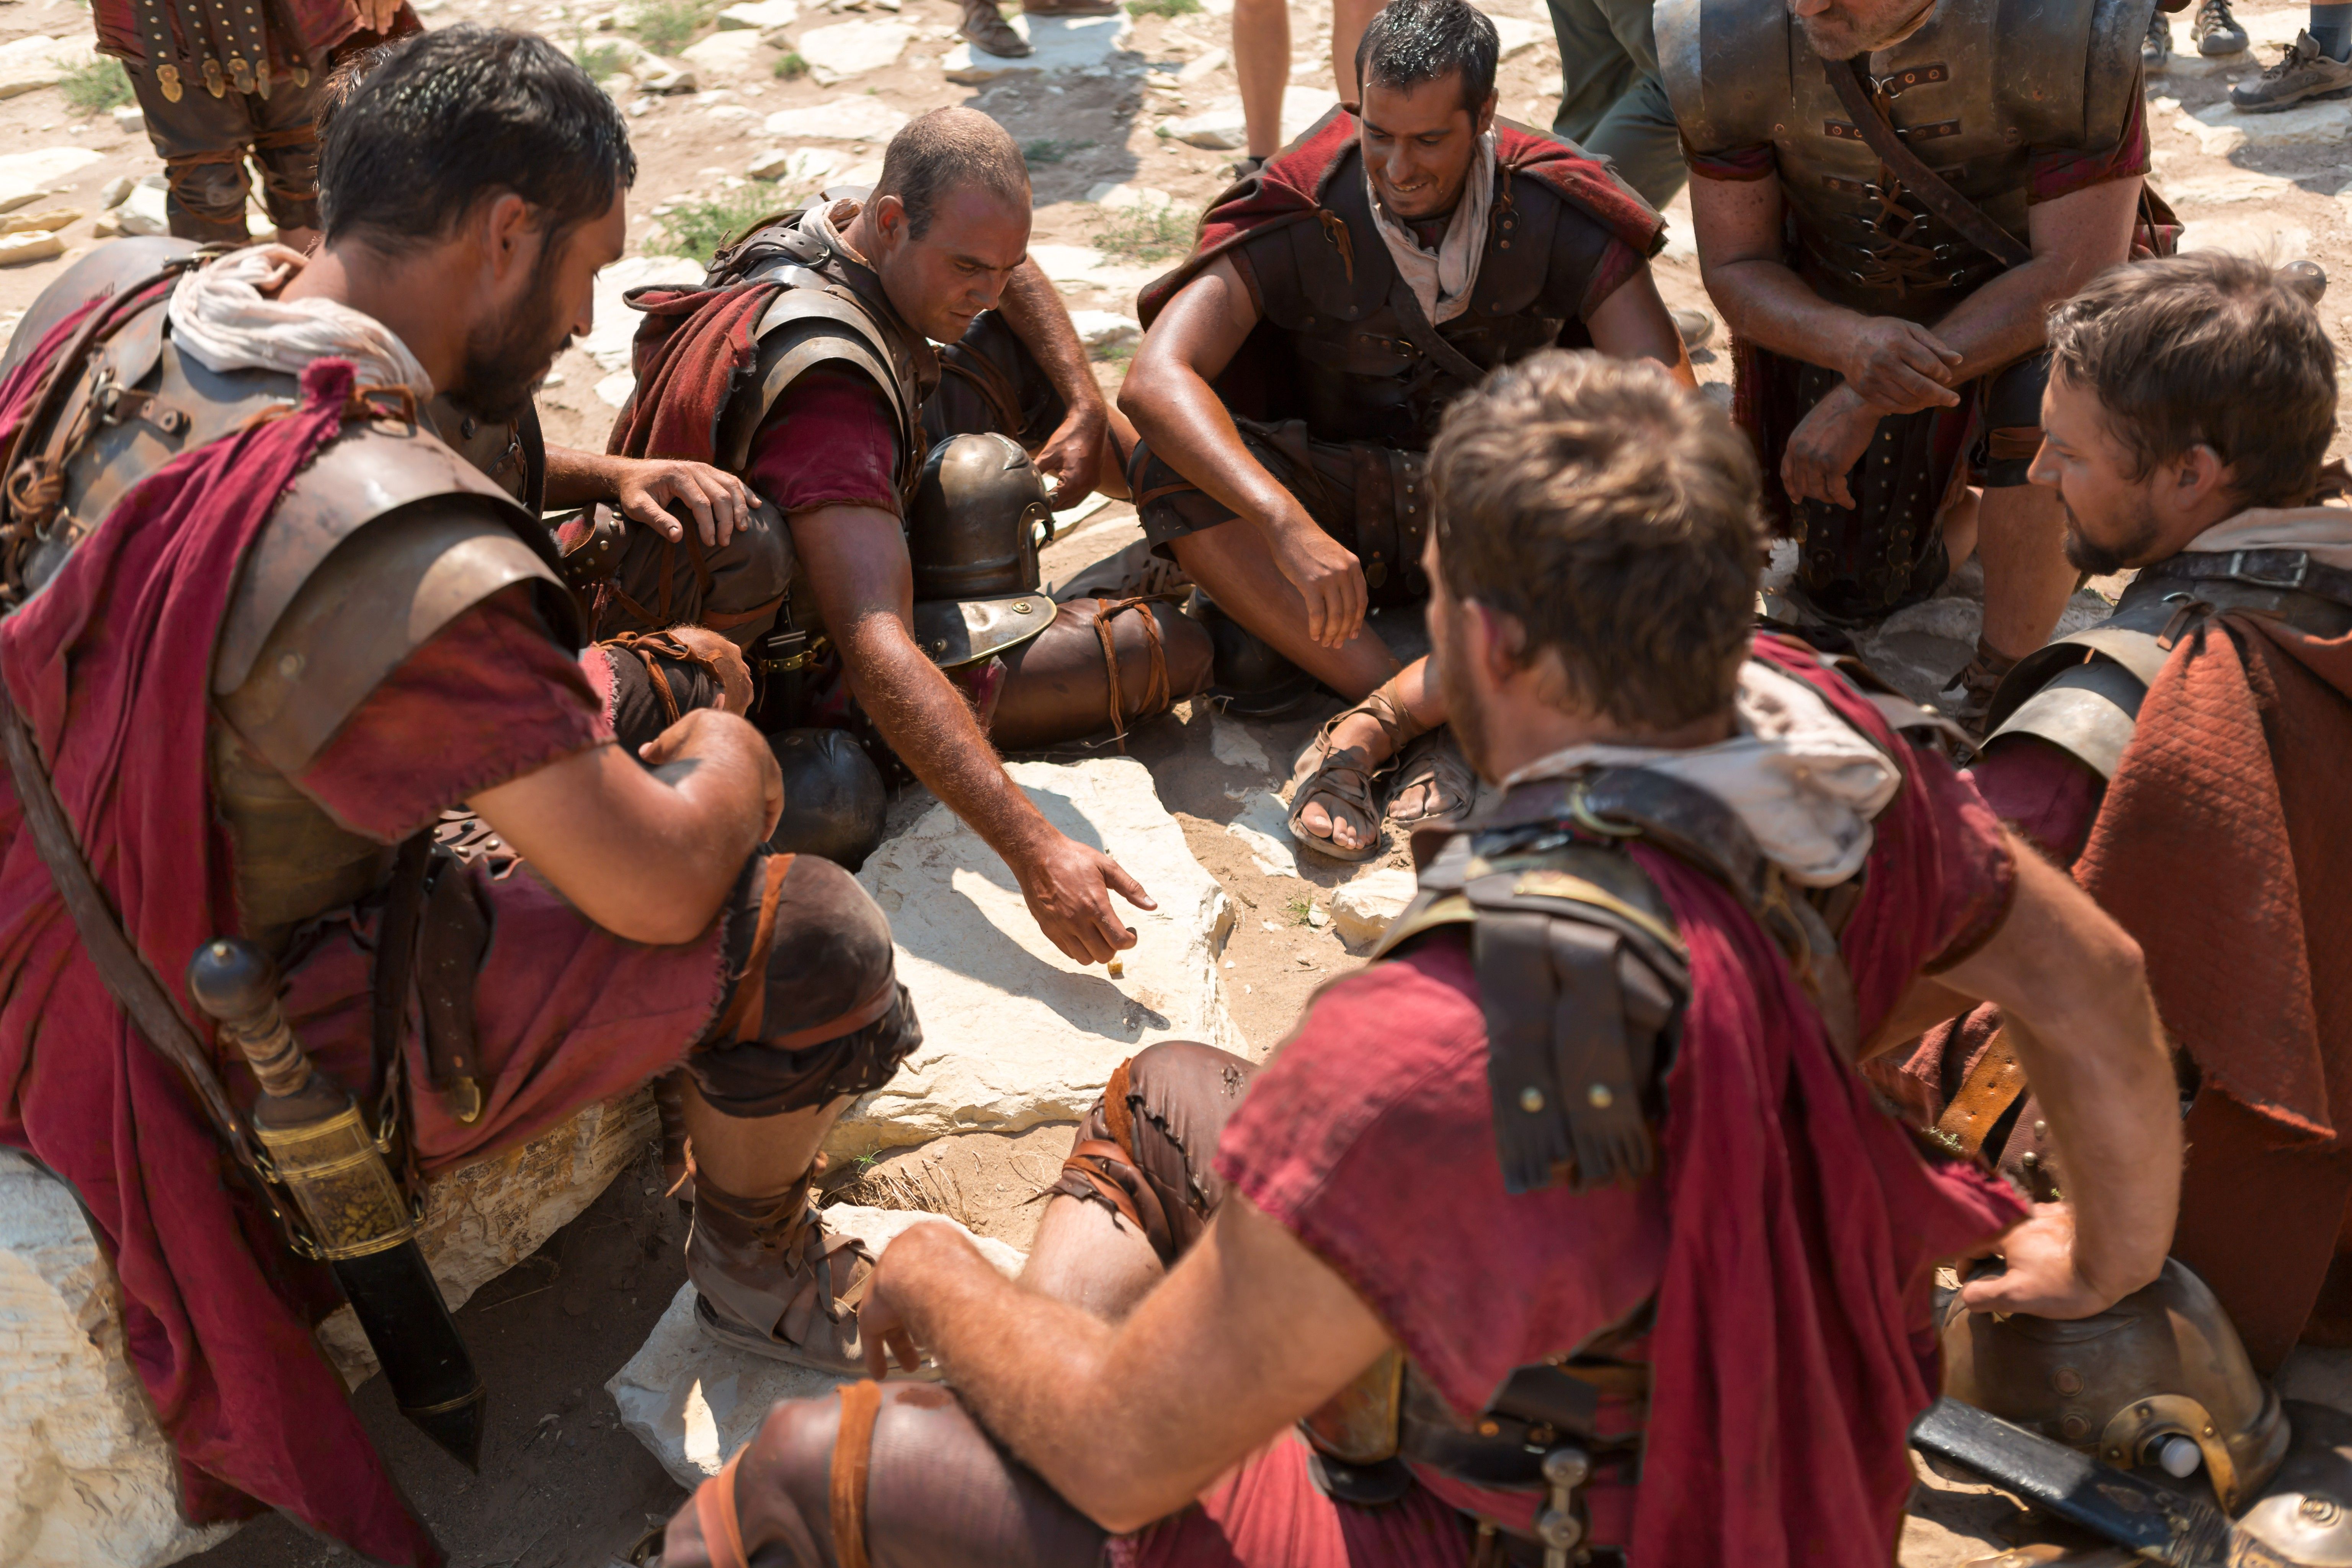 Roman soldiers gambling for Christ’s clothing and belongings.